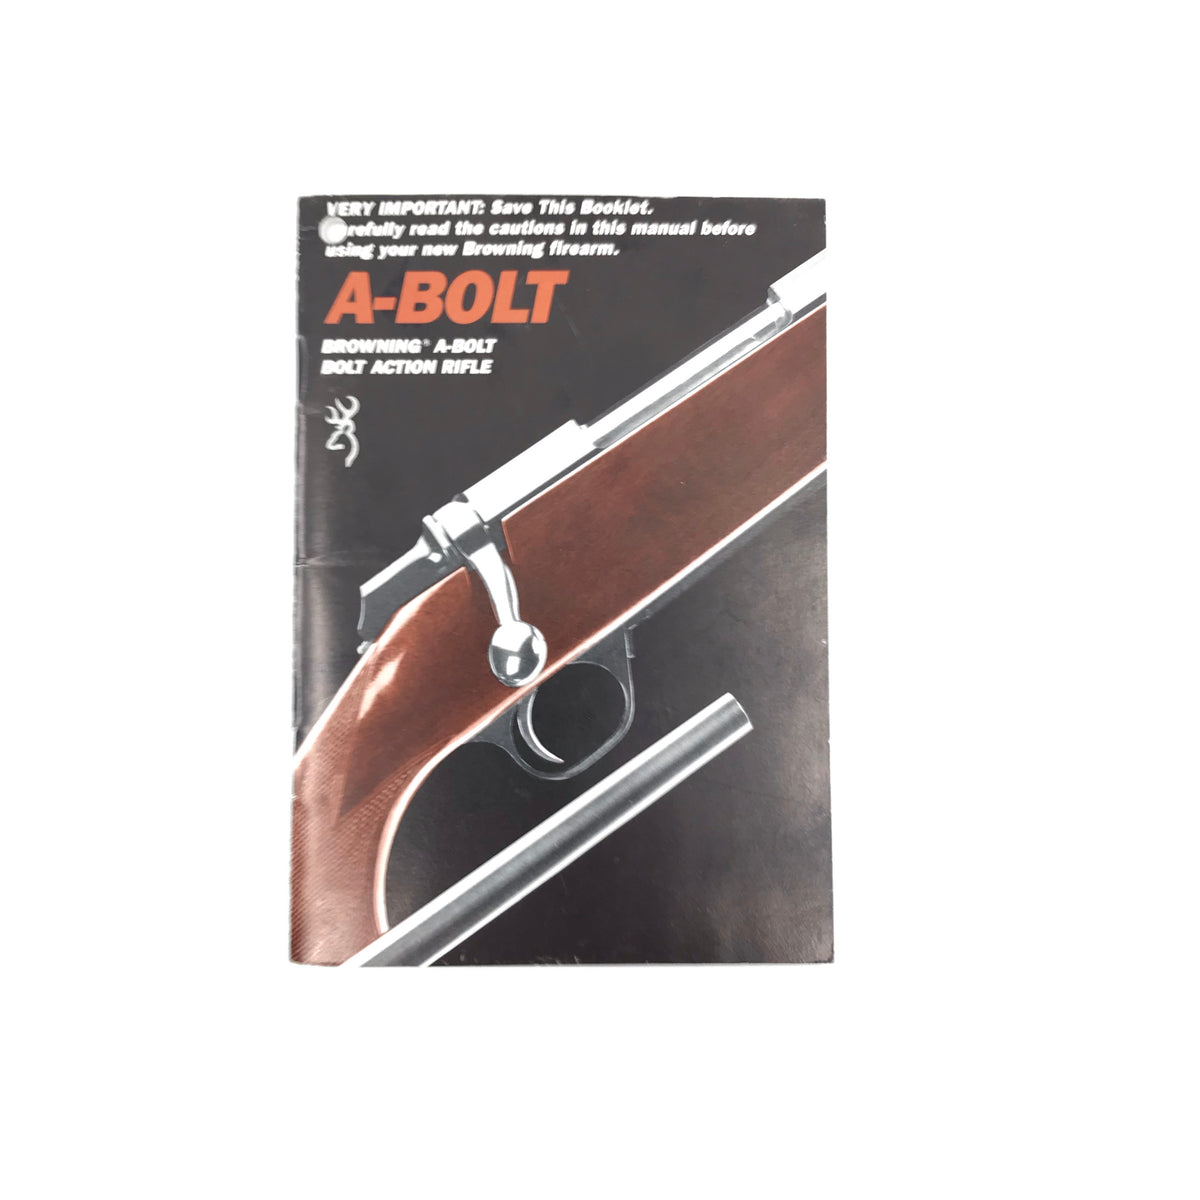 Browning A-Bolt Bolt Action Rifle Manual (1989)